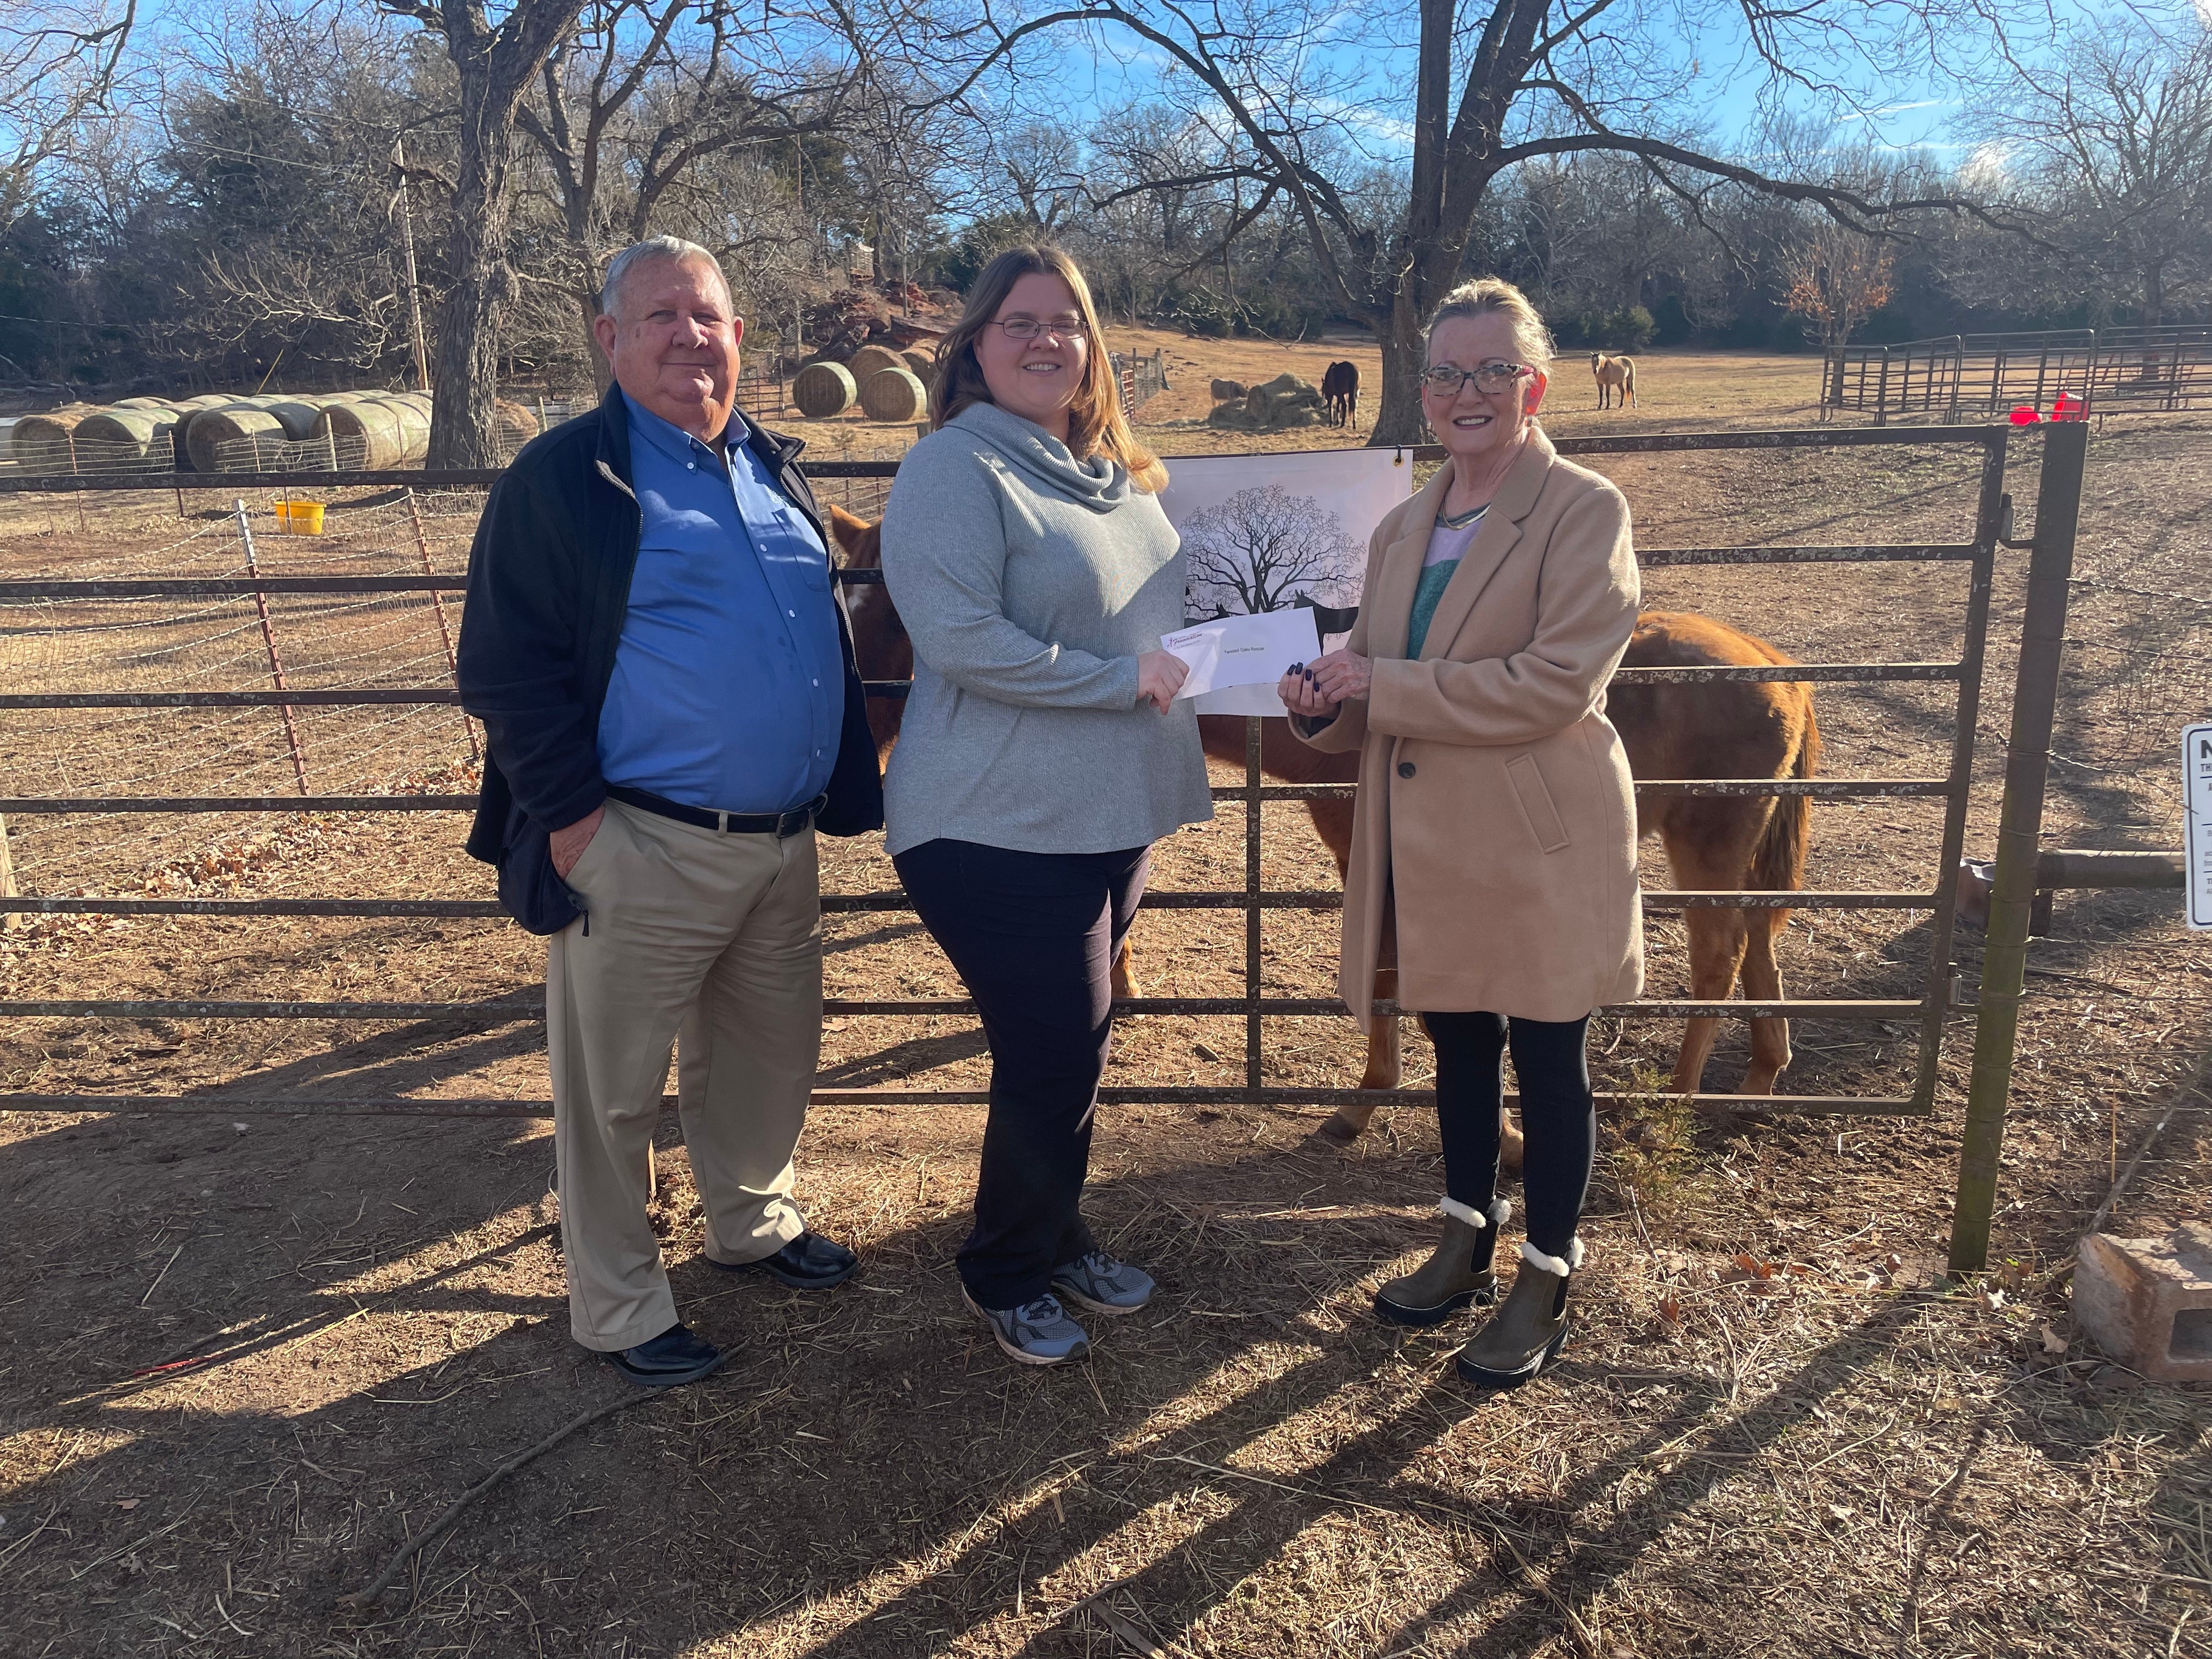 (Bill Davis, Central board member, (left) and Gretchen Harlow, Central Foundation board member, (right) present Twisted Oak Rehab and Rescue’s Alysse Beattie (center) with a grant.